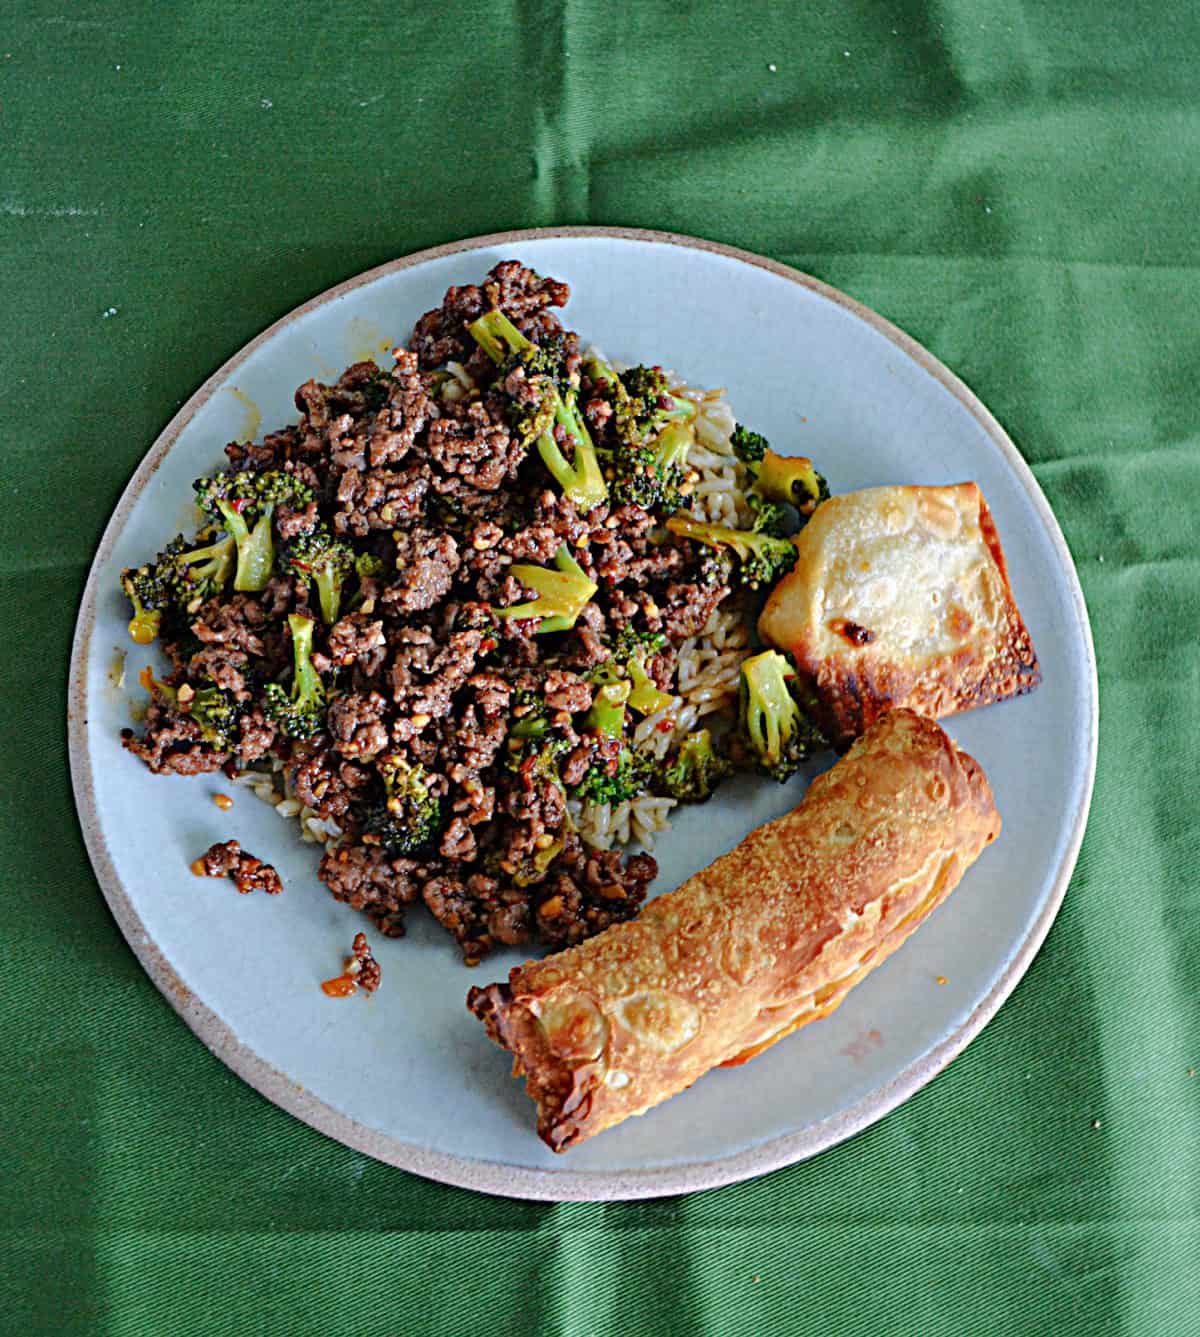 A plate with ground beef and broccoli, an egg roll, and a wonton. 